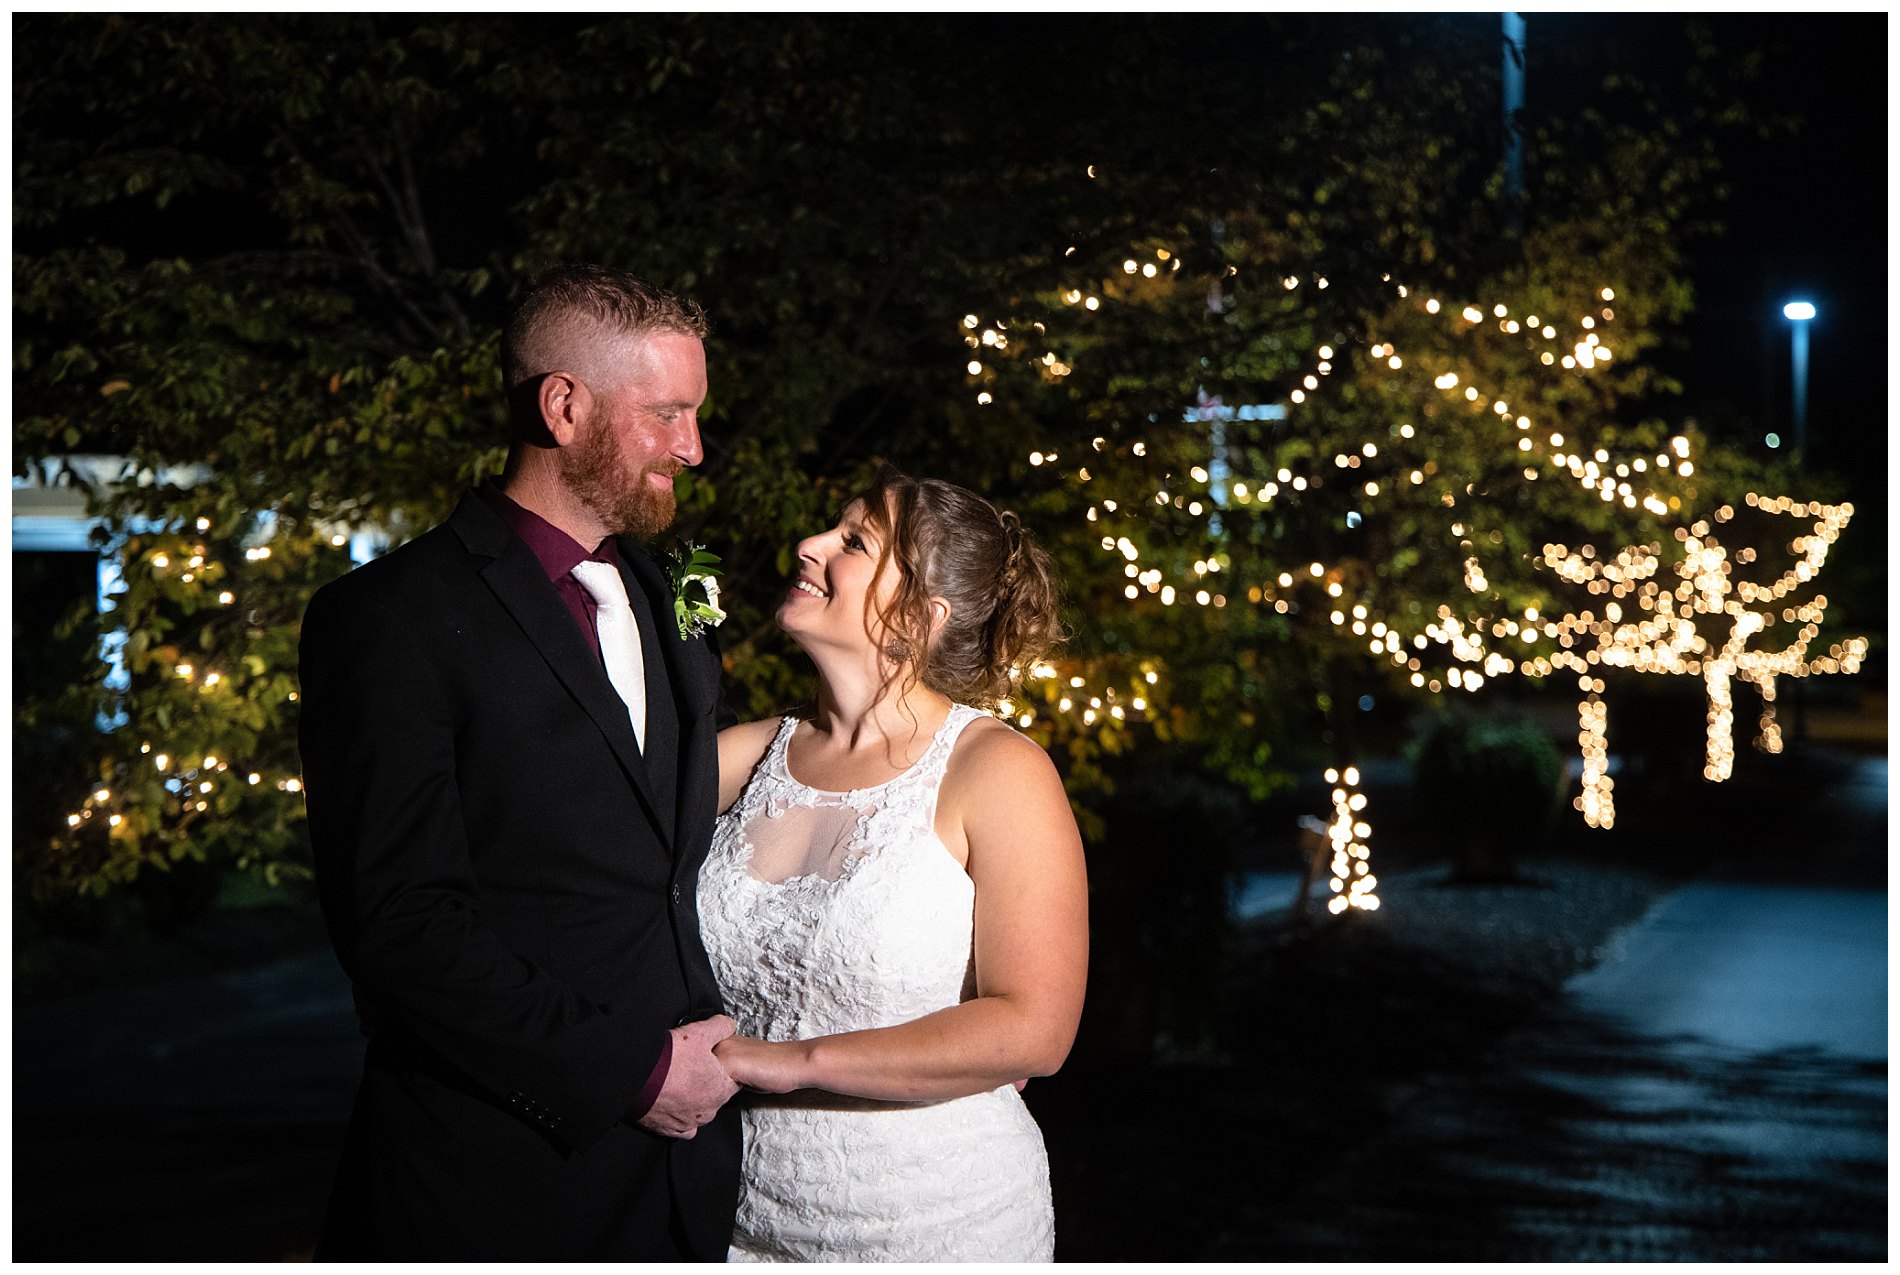 bride and groom outdoors at night with christmas lights in tree branches